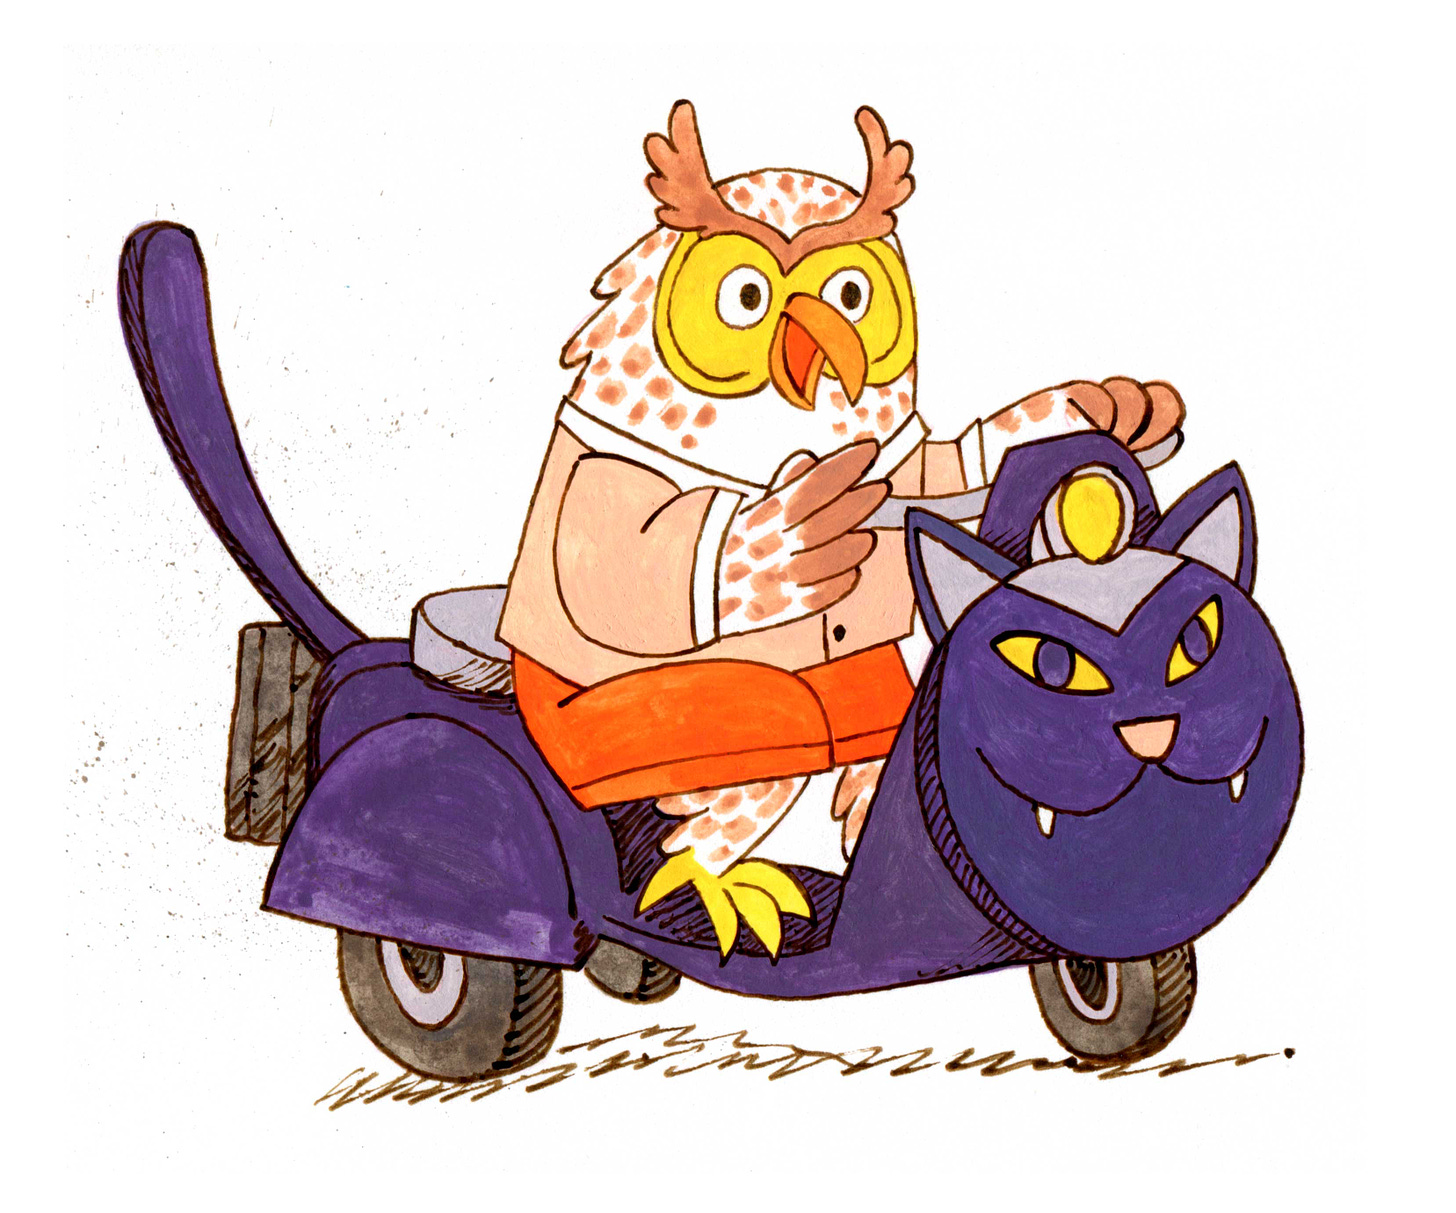 ode to a scarry halloween owl on a motorbike hootin and scootin Kayla stark illustration